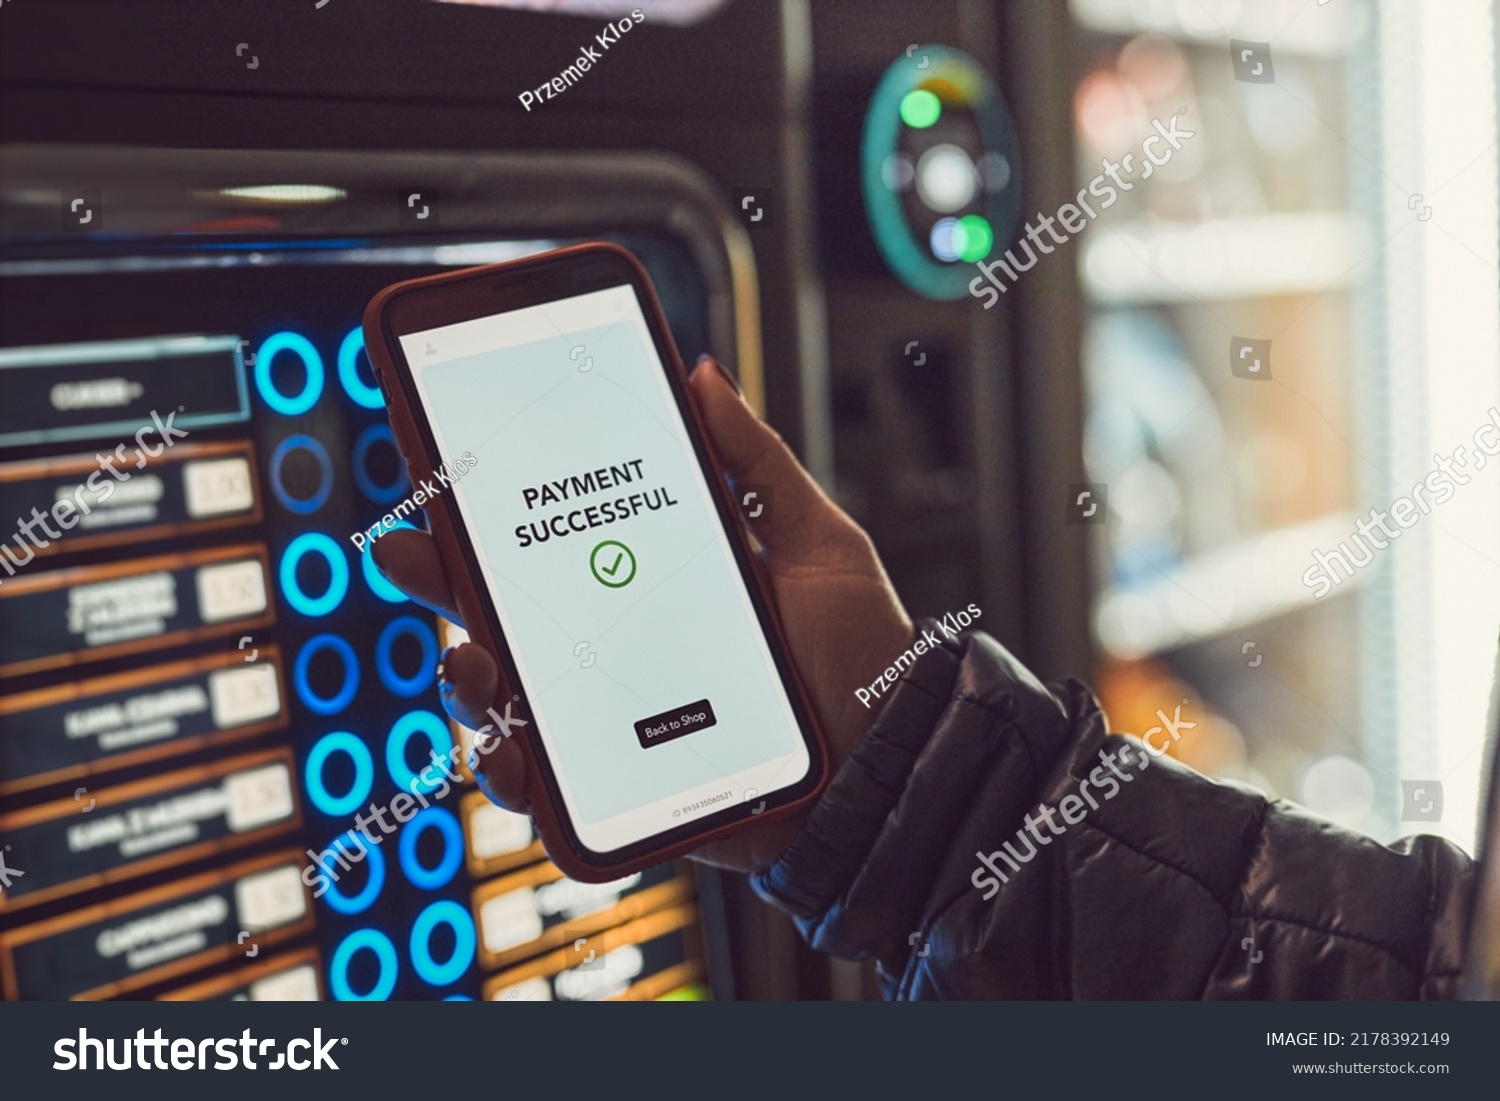 Consumer paying for product at vending machine using contactless method of payment with mobile phone. Woman using payment app on smartphone to buy product. Female hand holding smart phone with pay app #2178392149